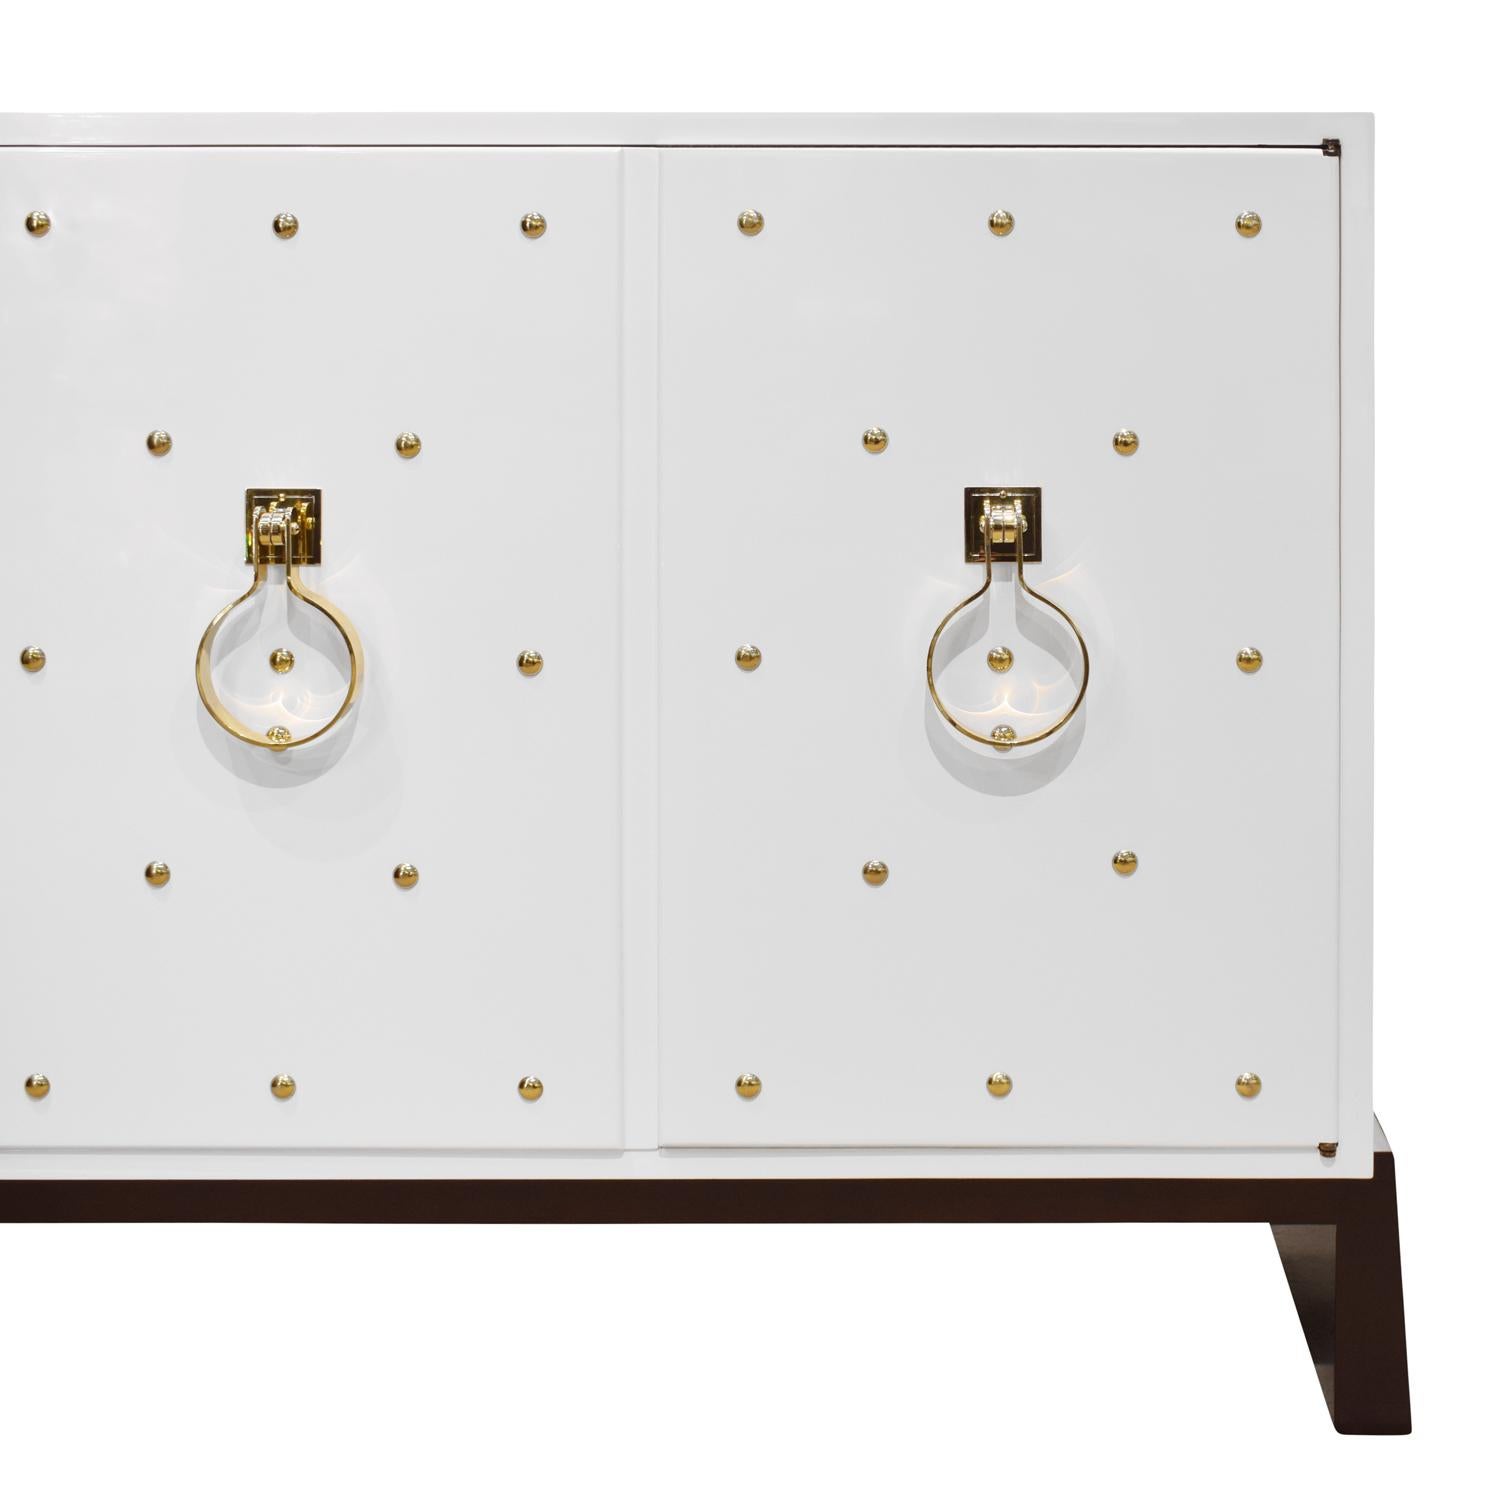 Hand-Crafted Tommi Parzinger Lacquered Cabinet with Brass Studs 1950s 'Signed'